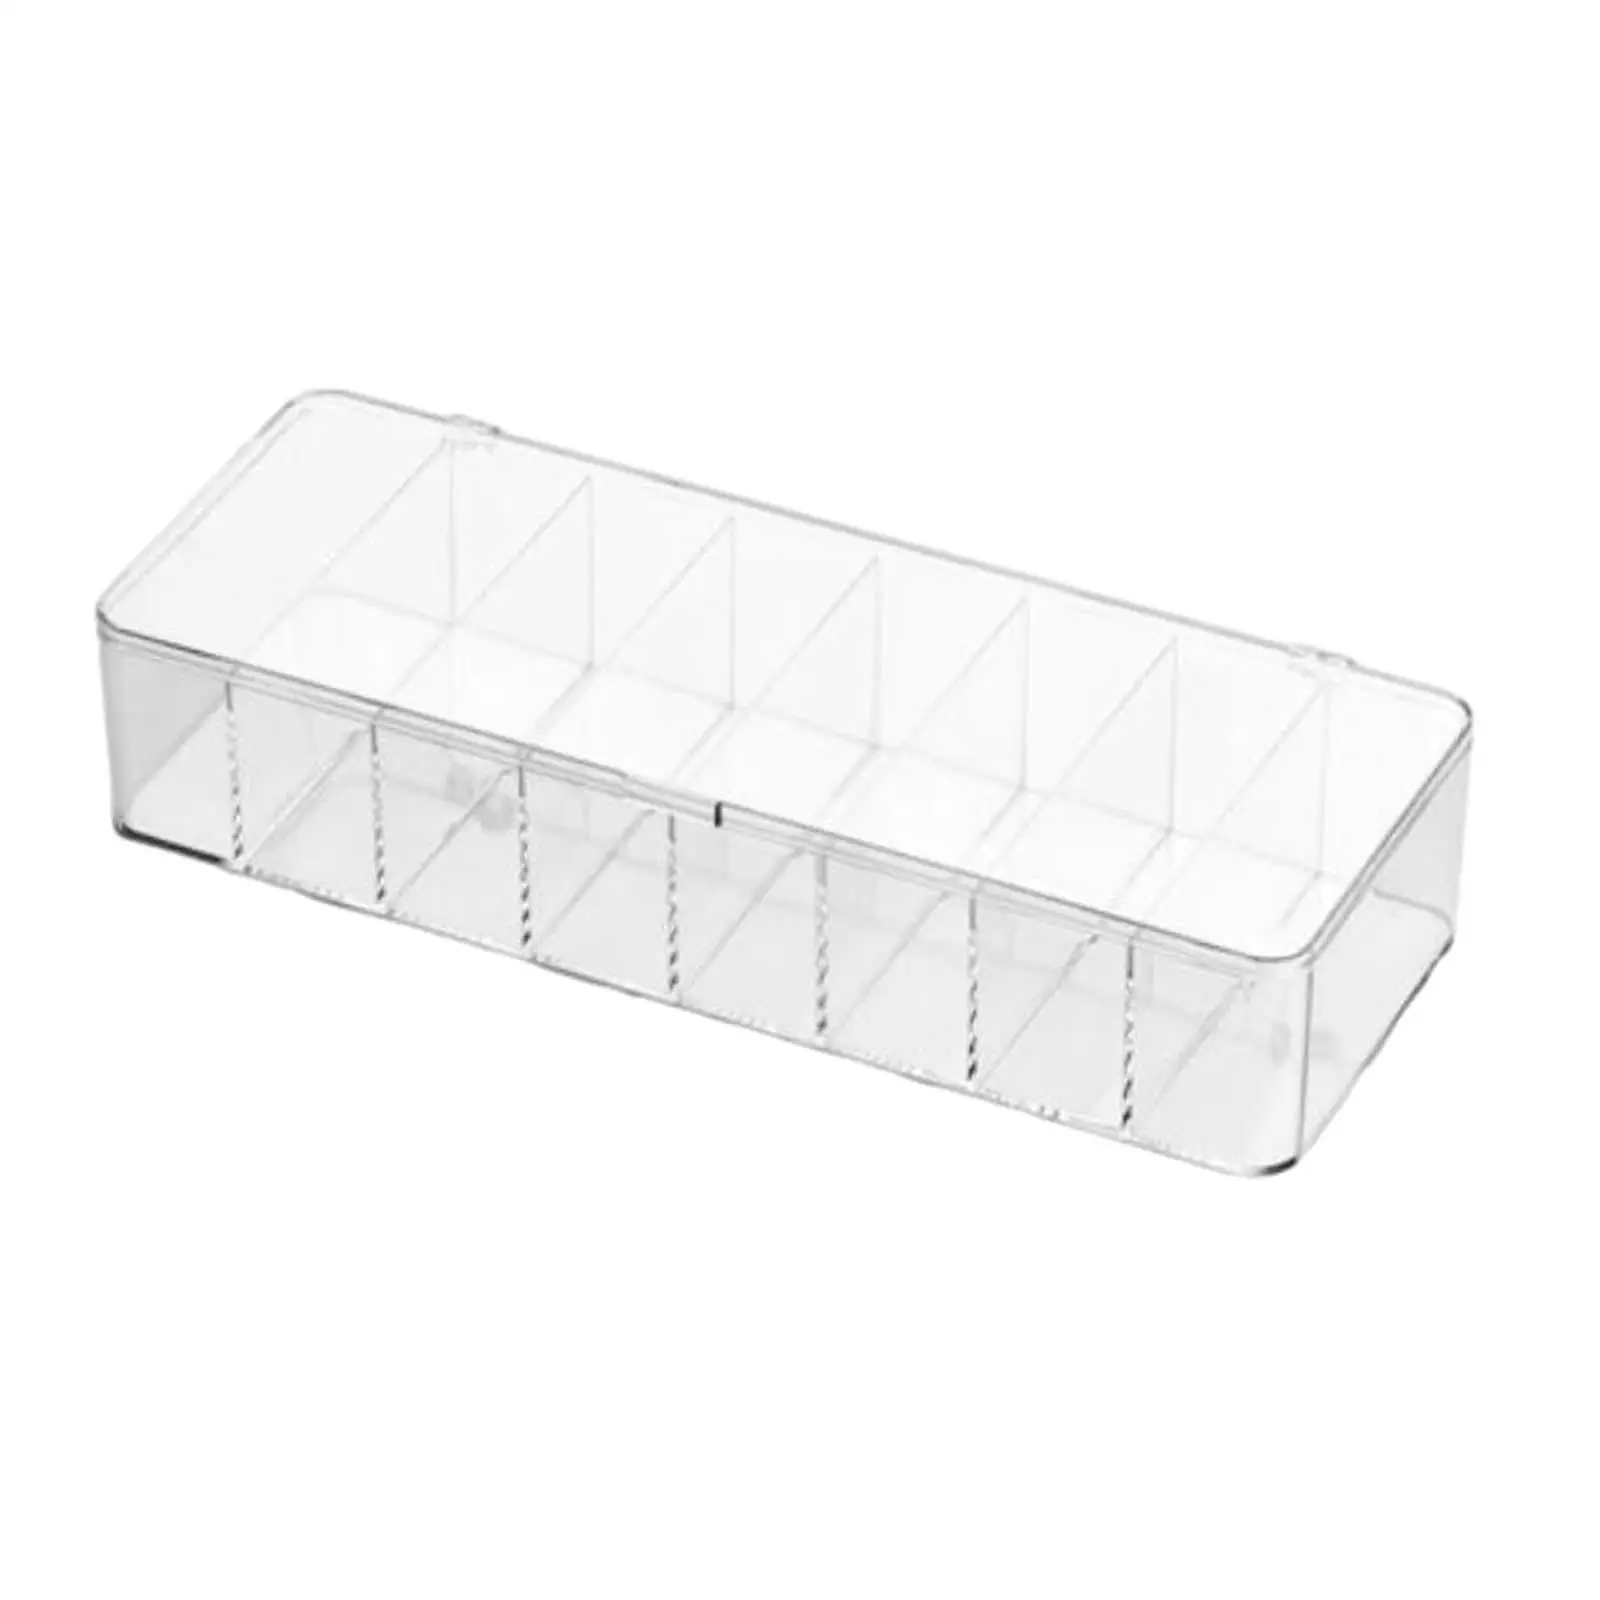 Data Cable Storage Box Cable Organiser Clear Electronics Organizer Boxes for Candy Paper Clips Small Clips Bracelets Buttons